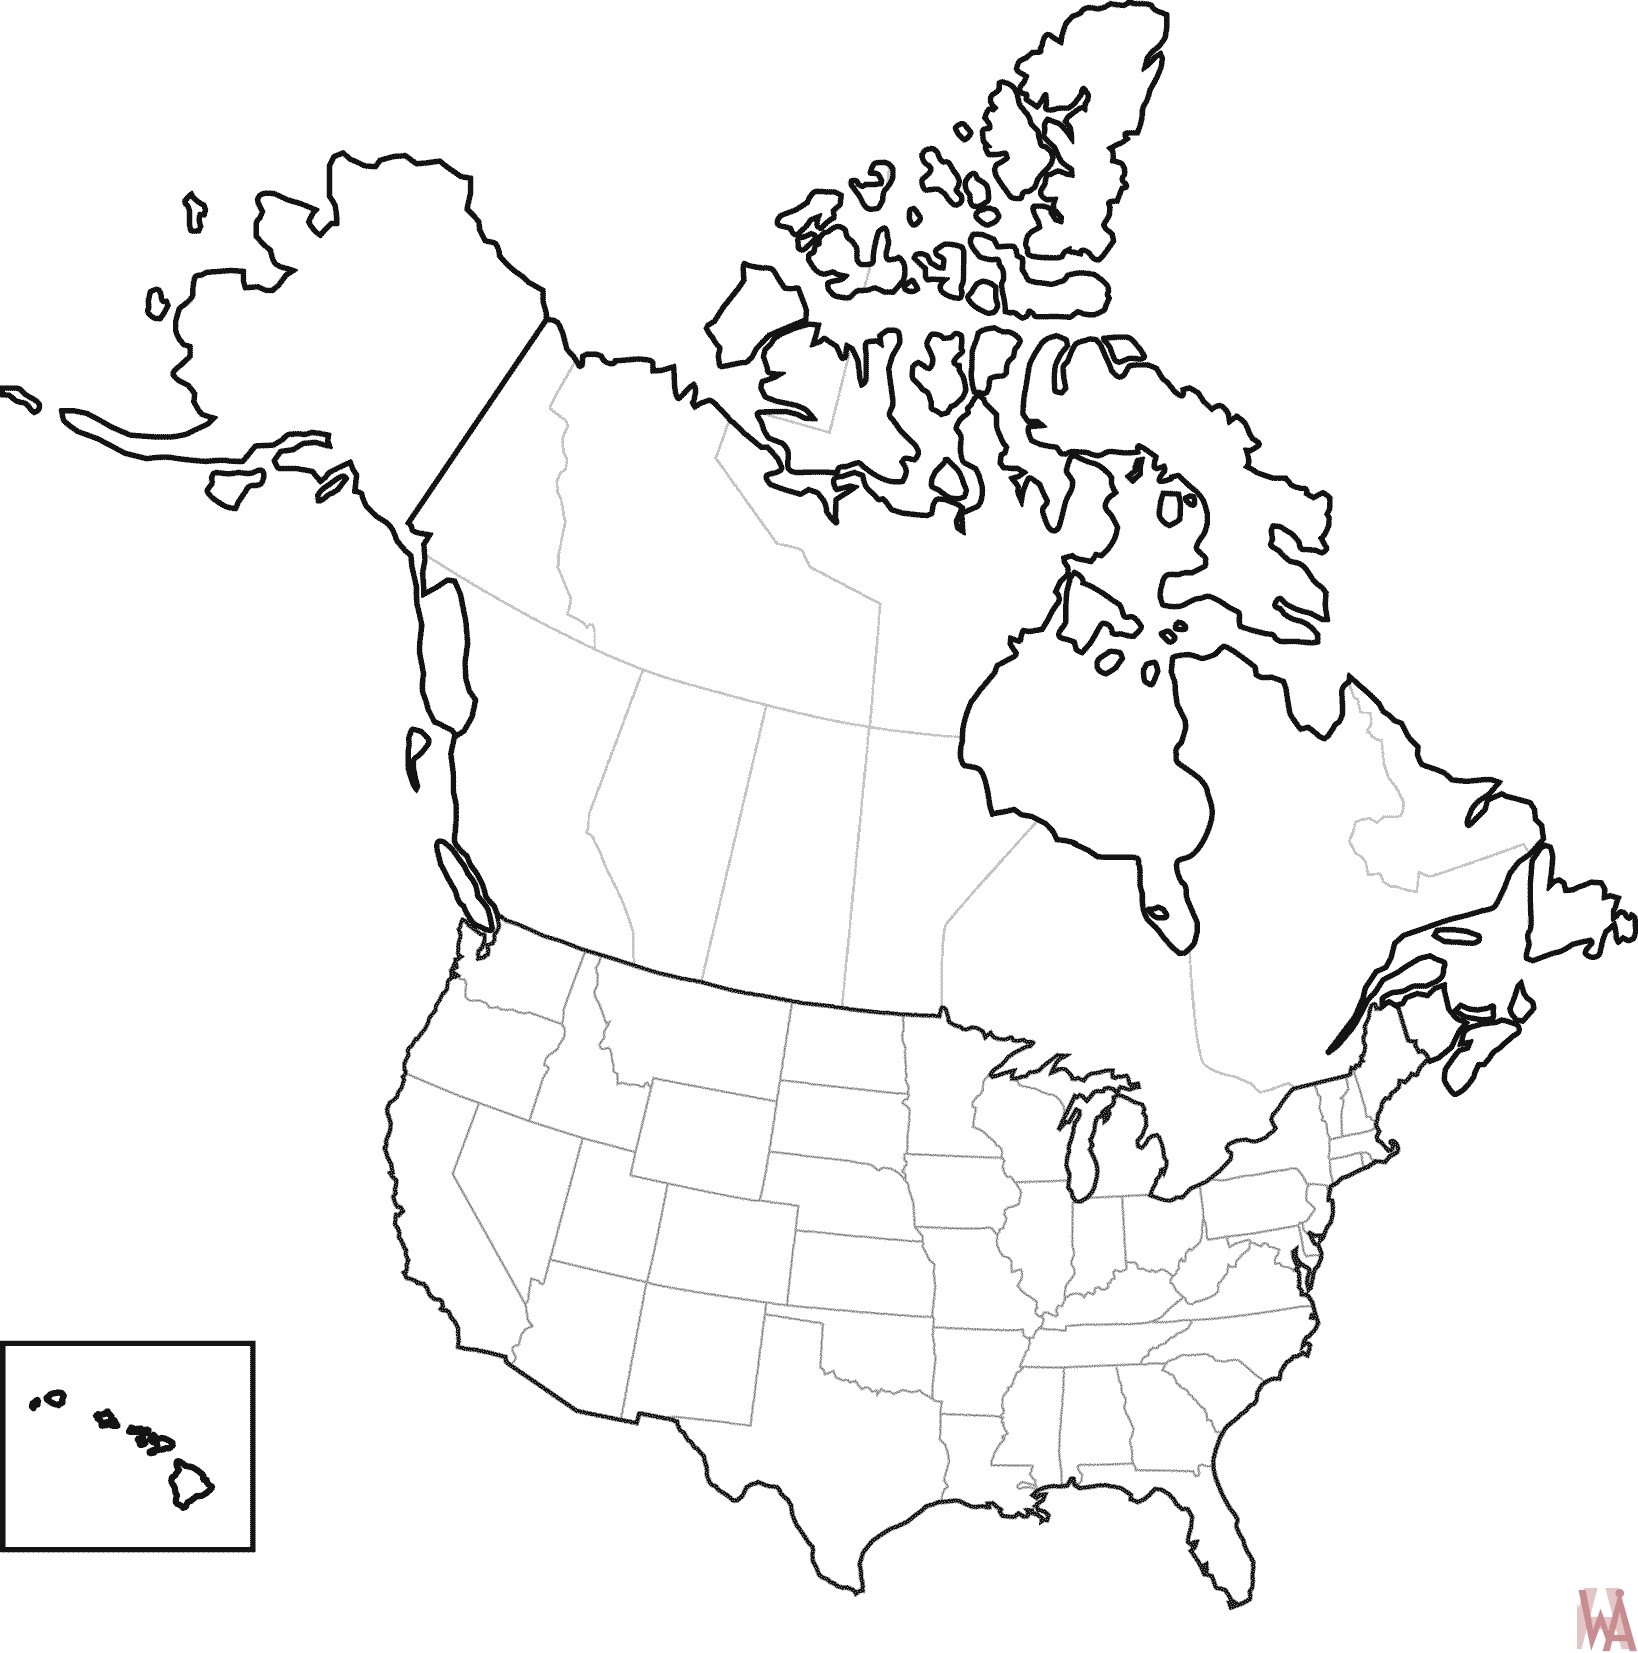 Blank Map Of United States And Canada Blank Outline Map of the United States And Canada | WhatsAnswer